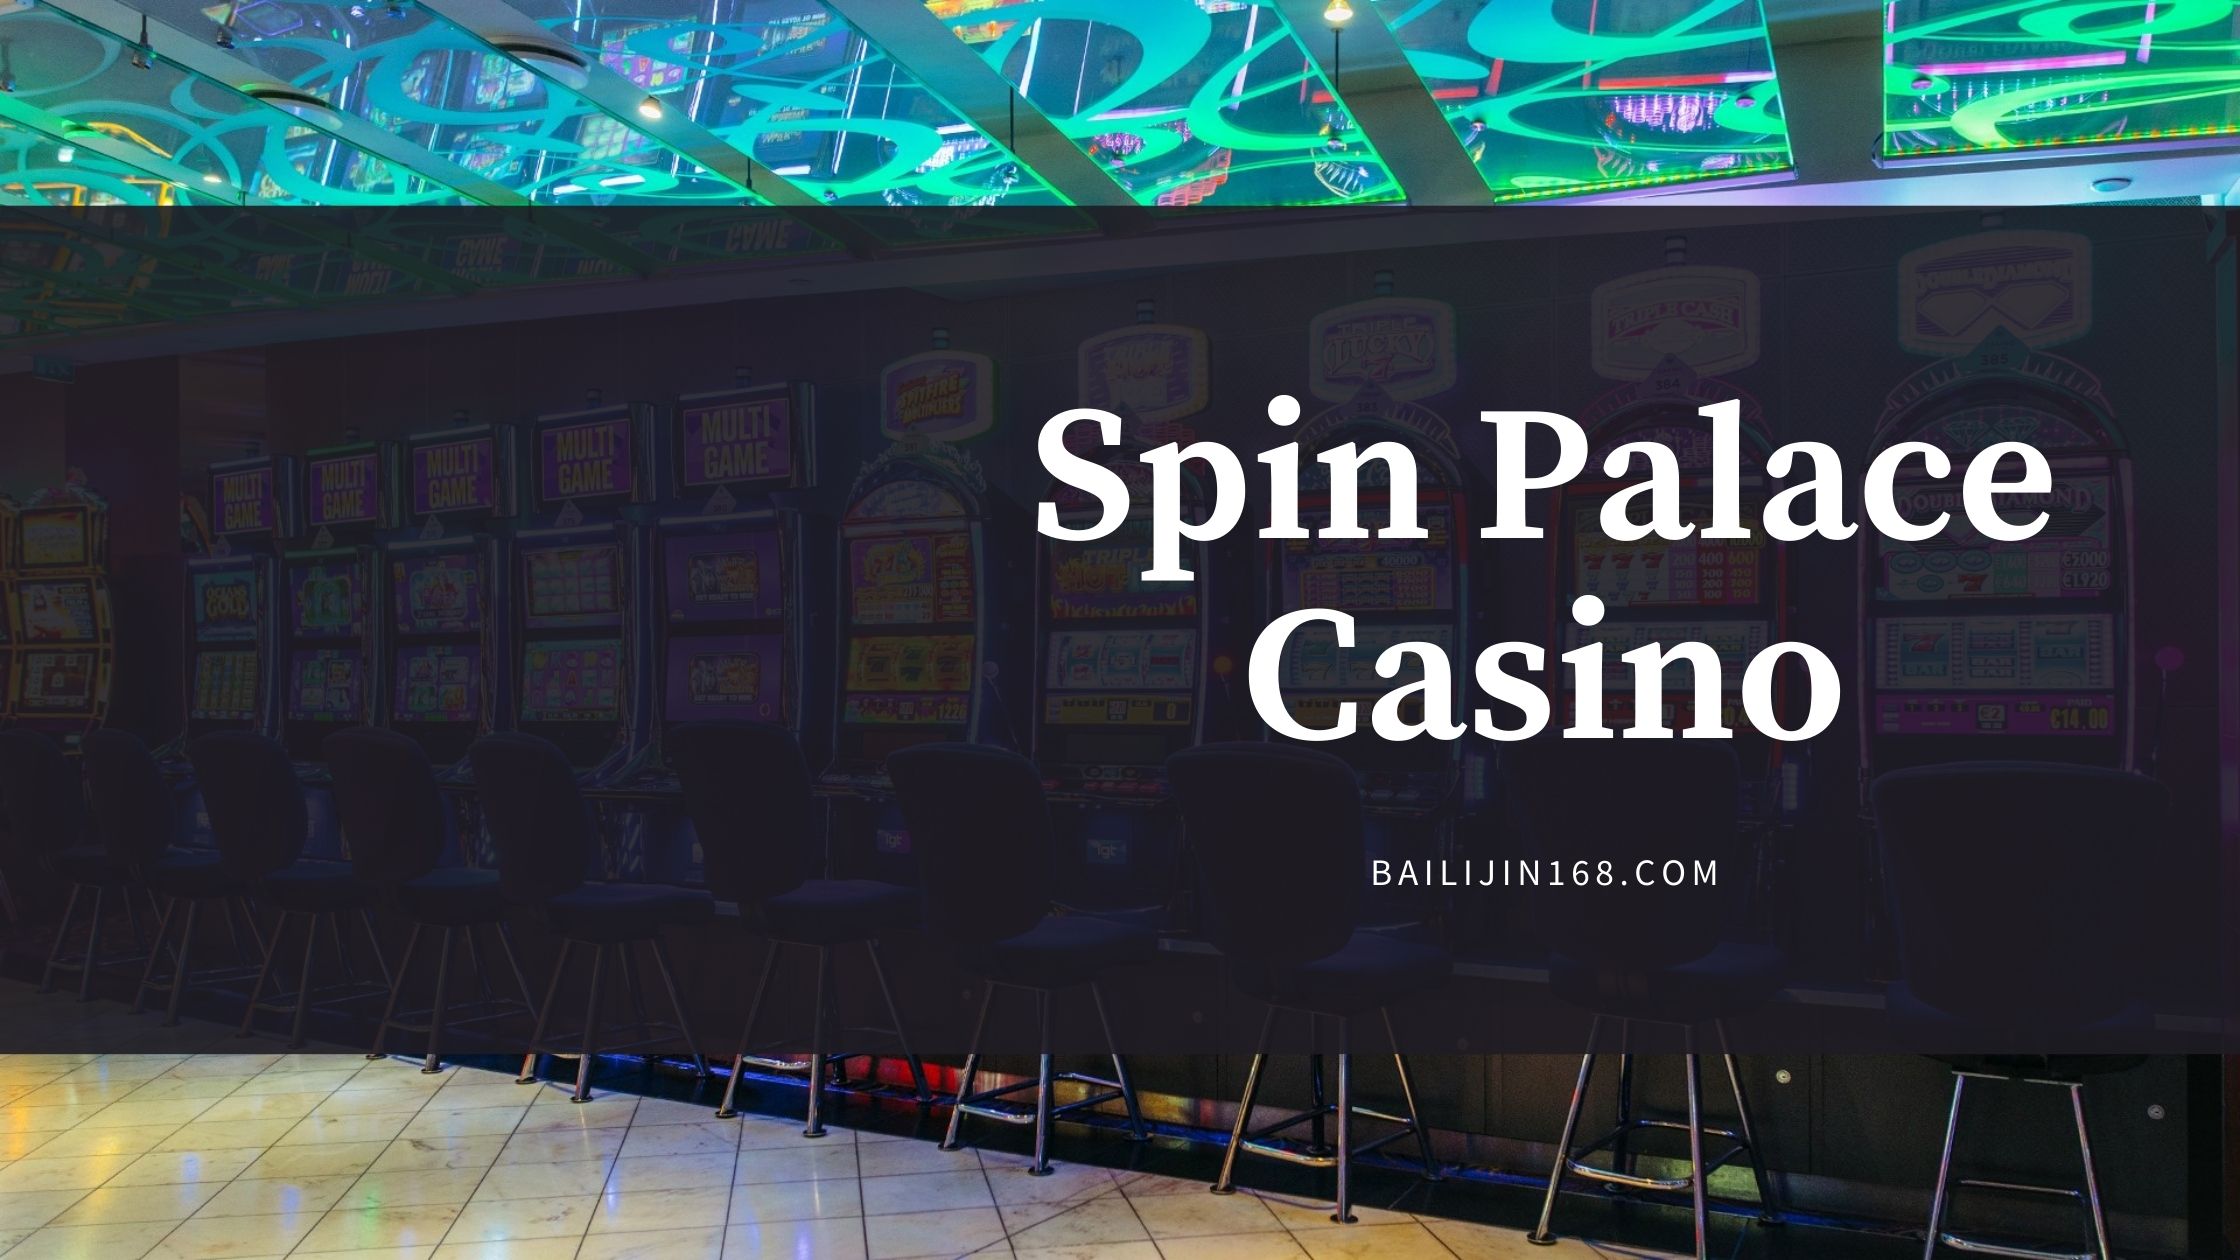 Play for Big Bonuses on Spin Palace Casino